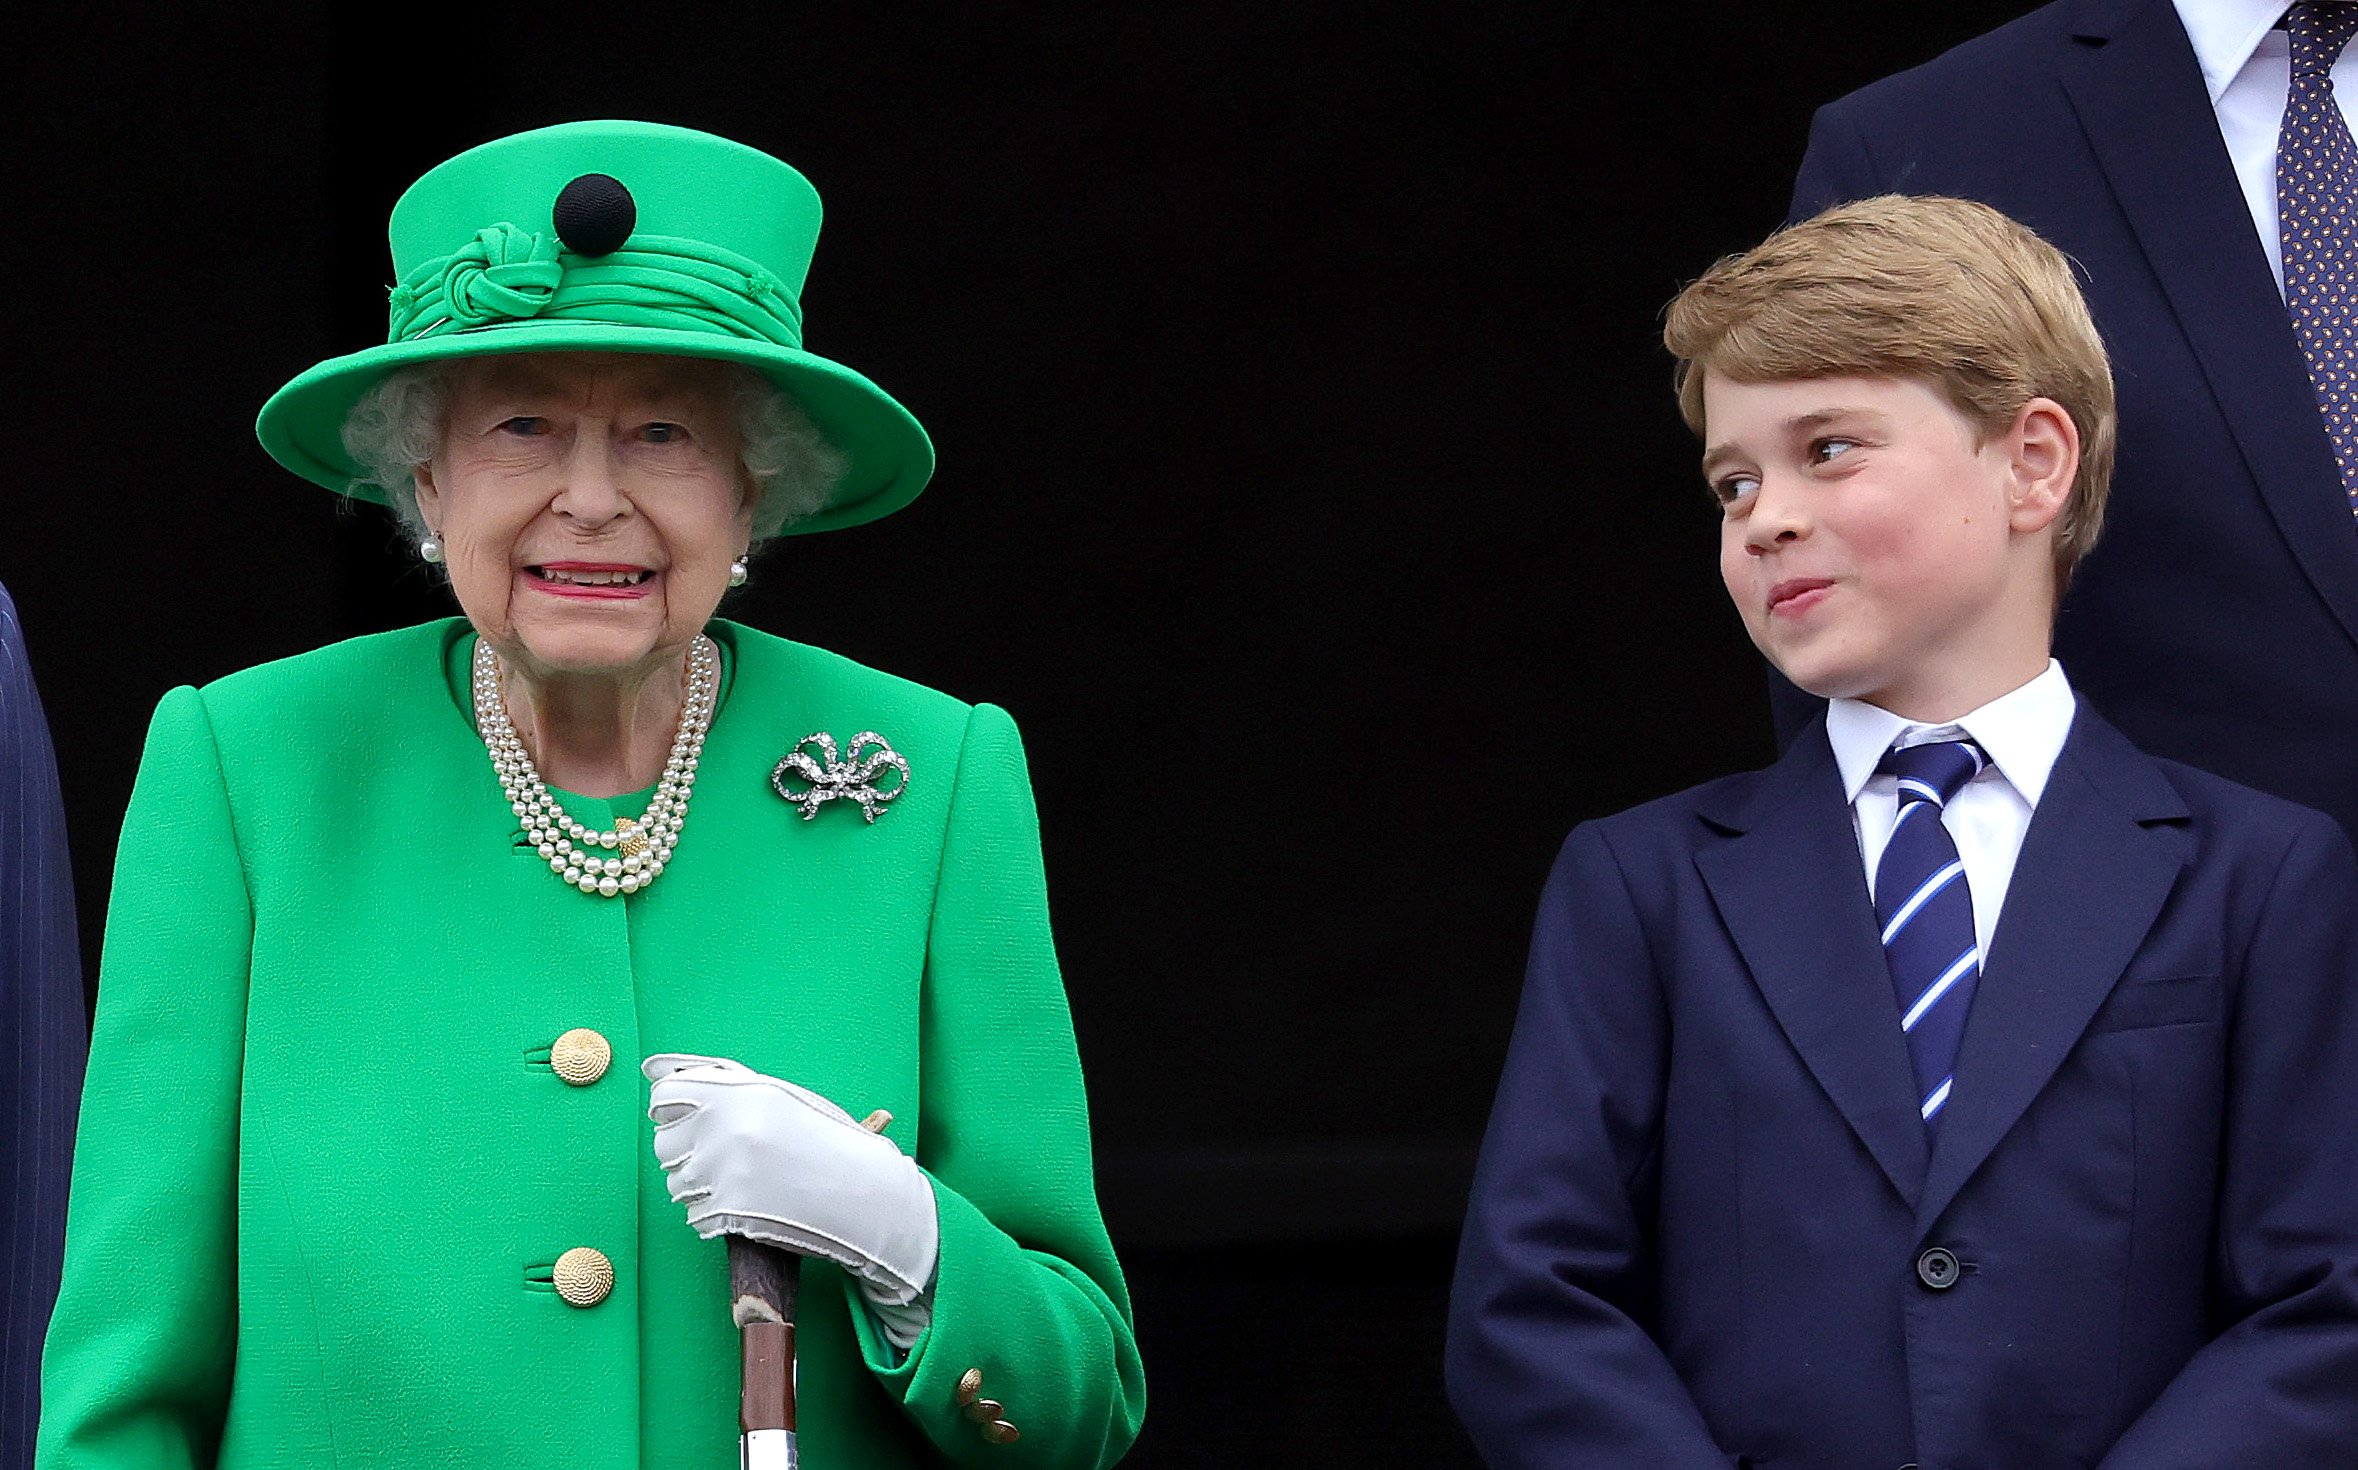 Queen Elizabeth II and Prince George of Cambridge on the balcony of Buckingham Palace during the Platinum Jubilee Pageant on June 05, 2022 in London, England | Source: Getty Images